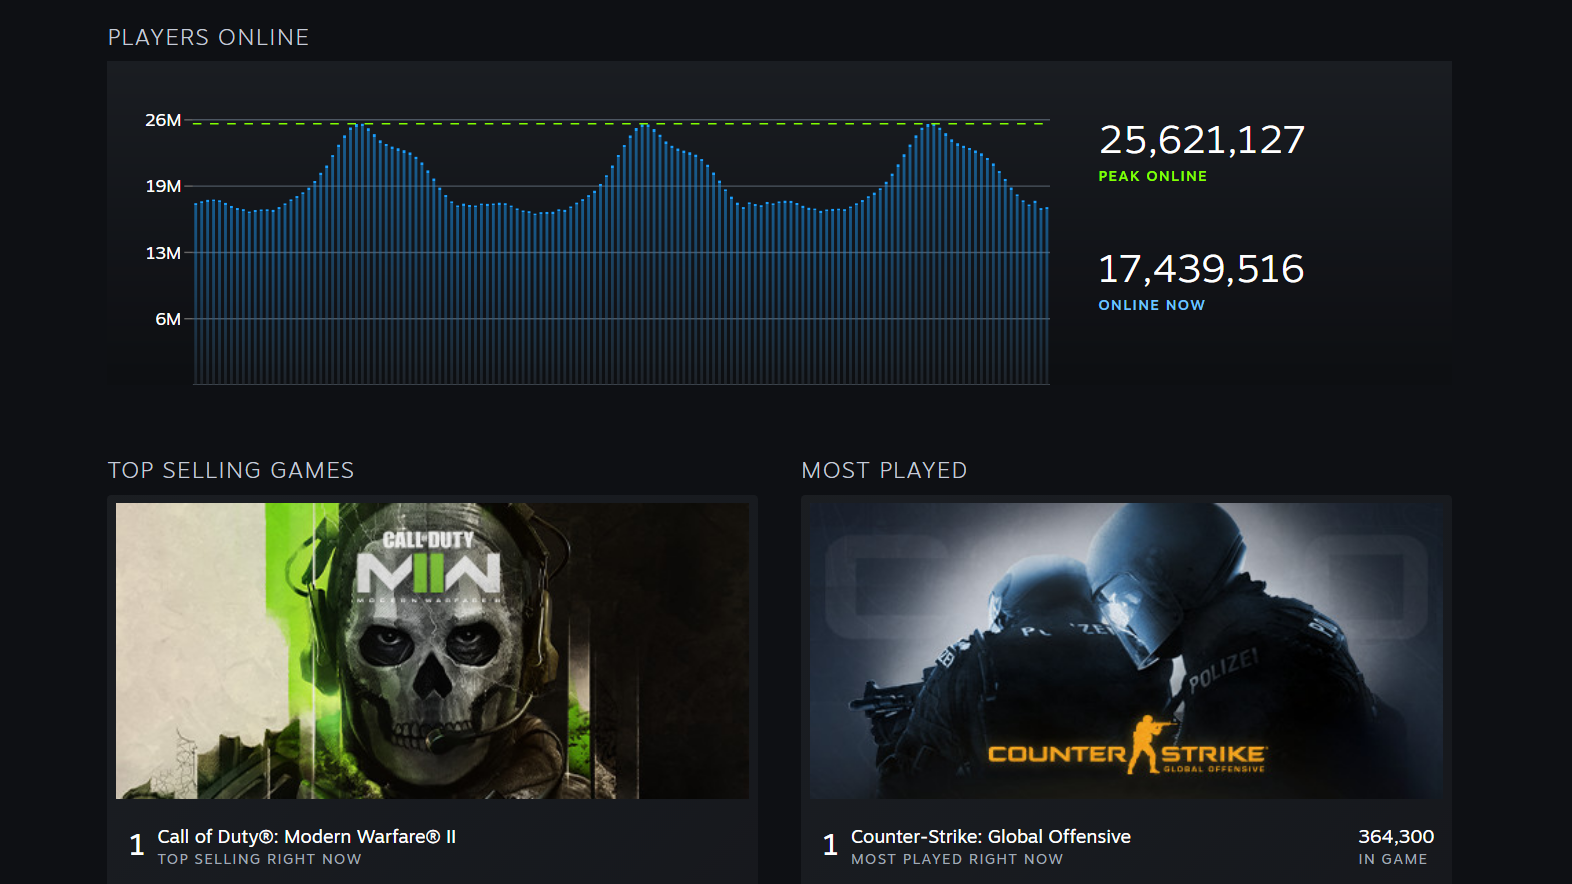 Steam just updated its stats page with Billboard-style top sellers charts